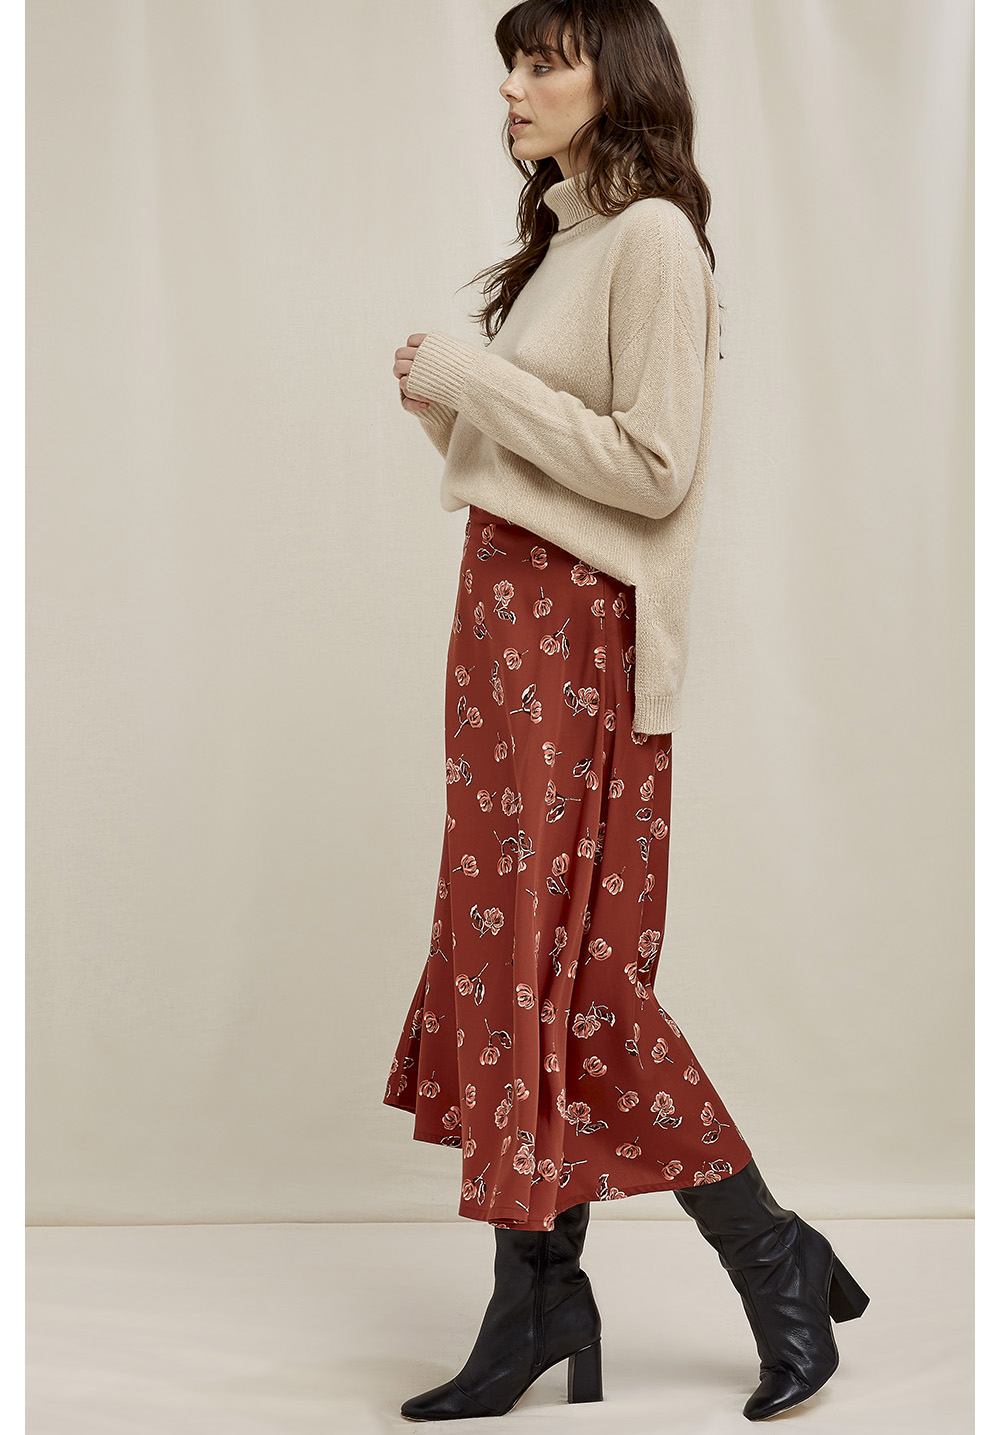 Model wearing a long red printed skirt with a beige turtleneck sweater from People Tree with black heeled boots